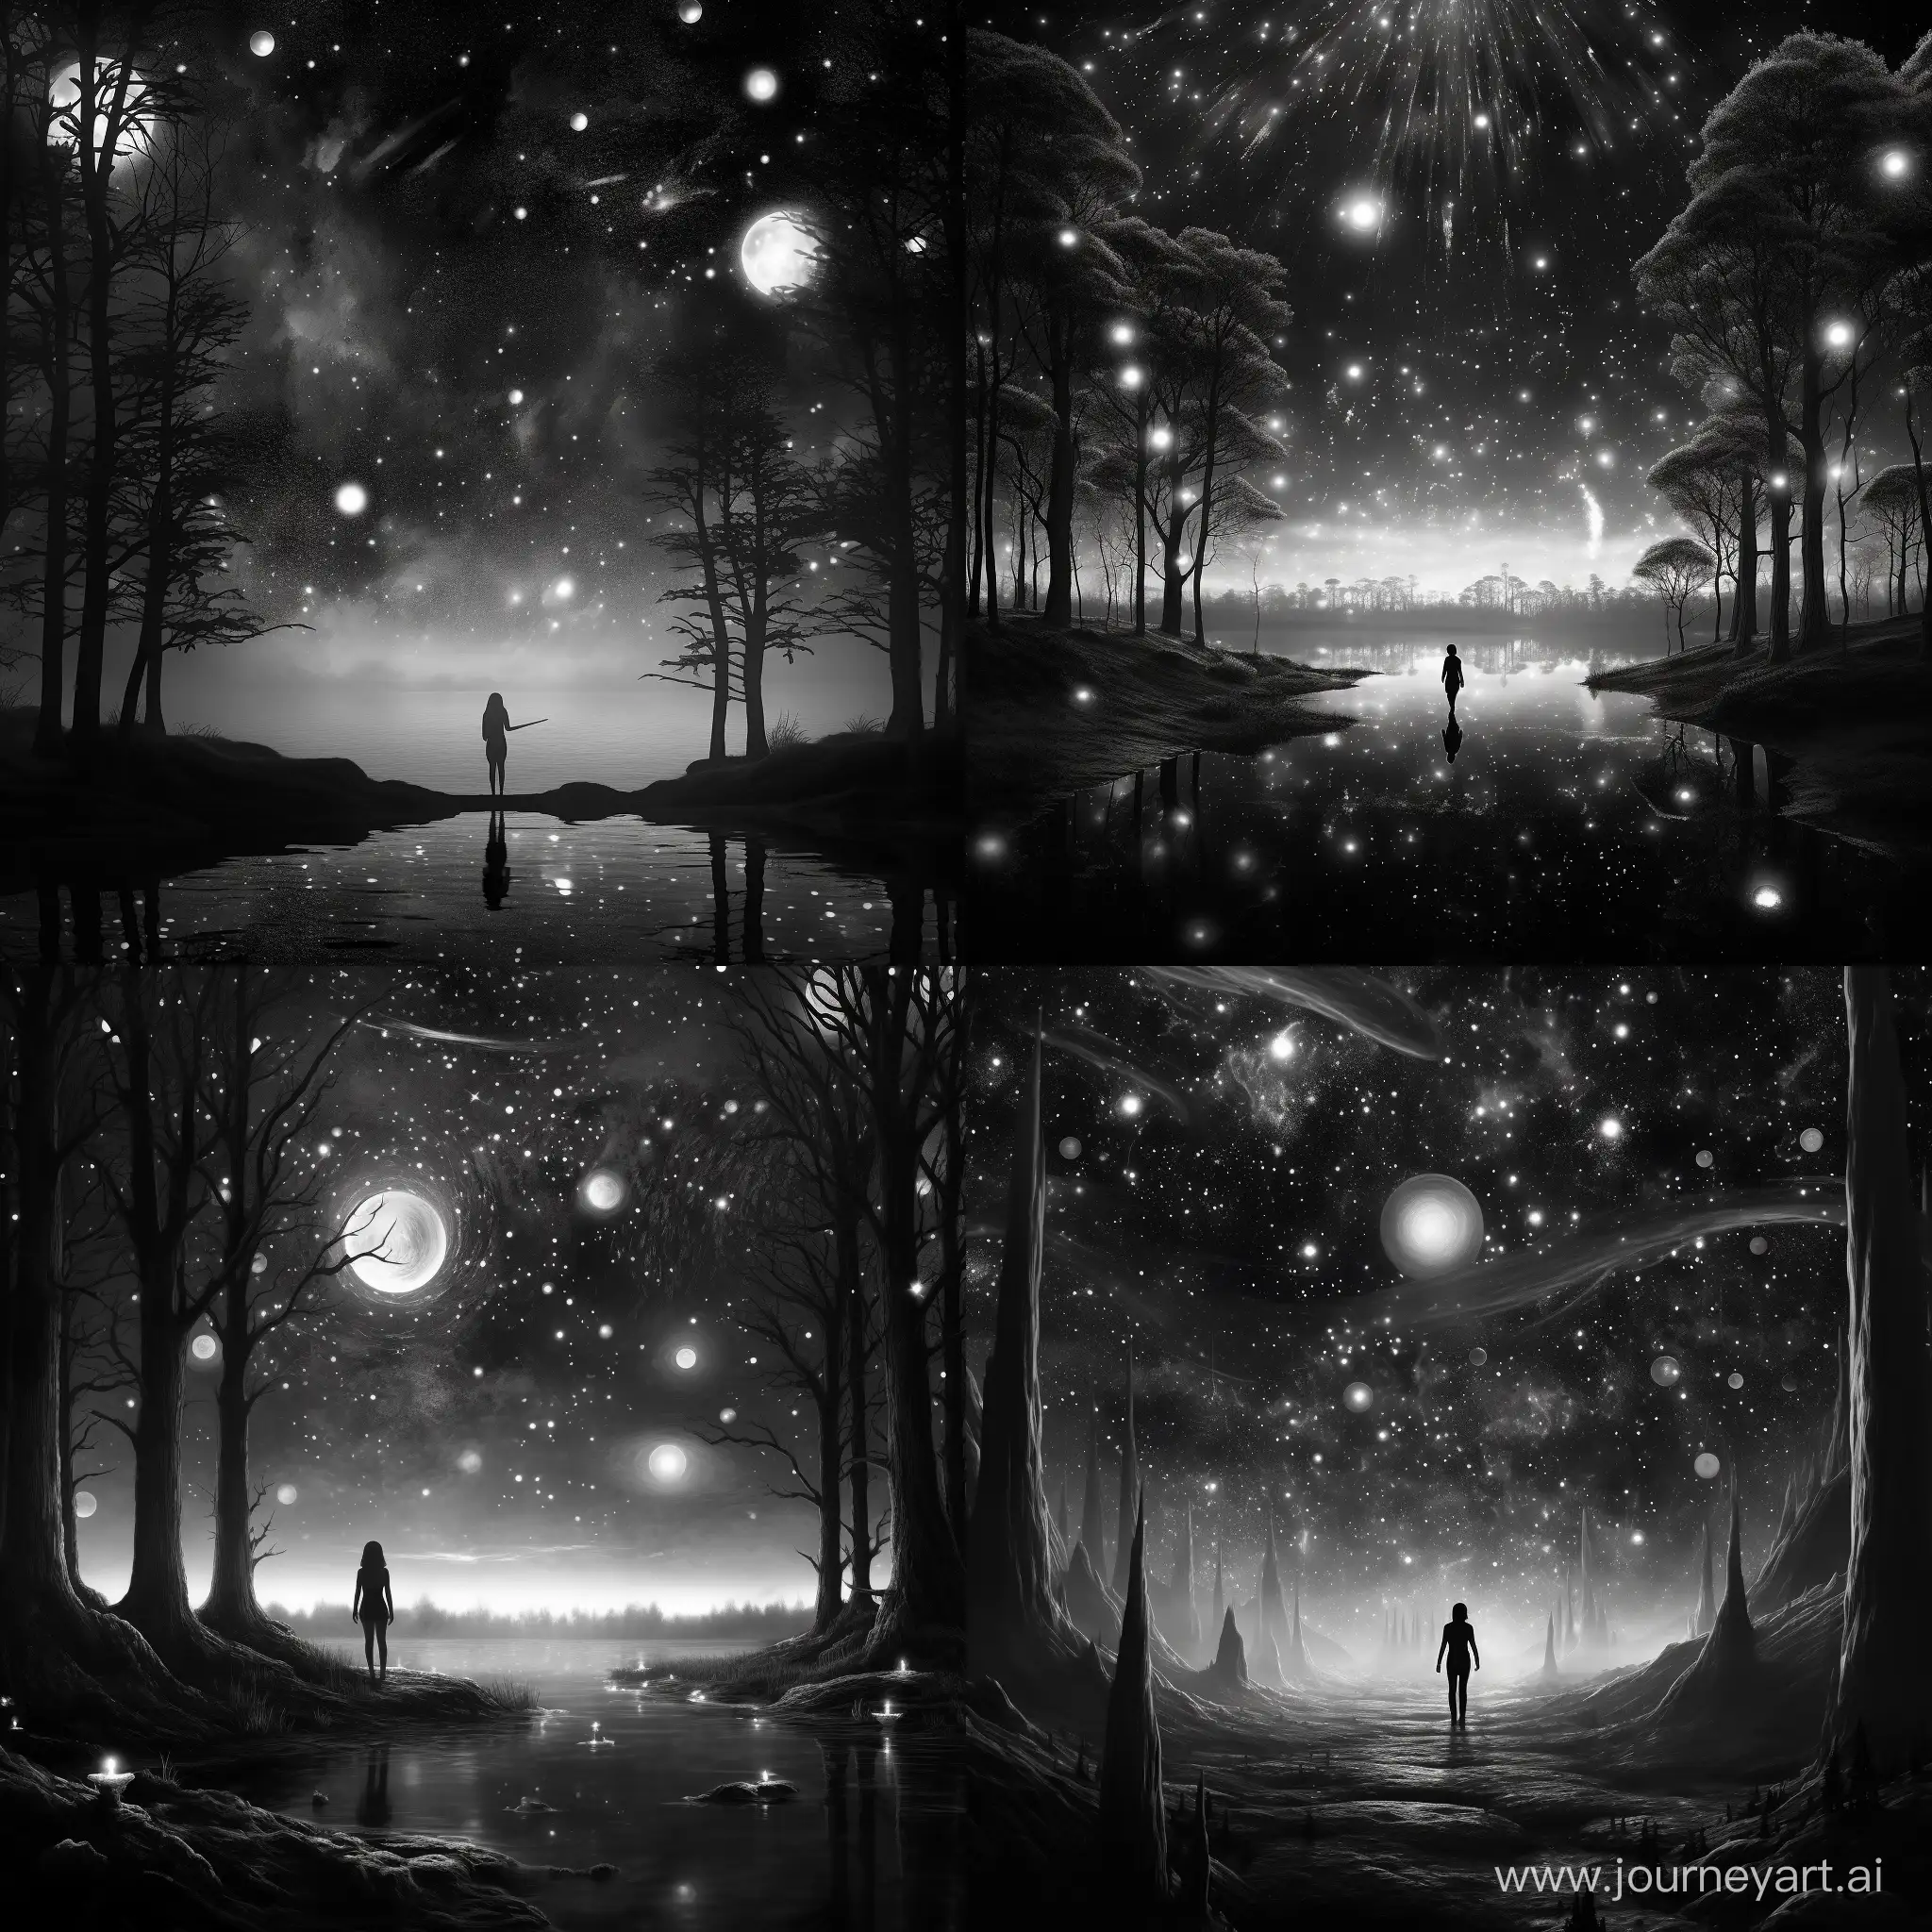 Create a magical black and white scene featuring stars, planets, and a cosmic dance of light in the night sky.